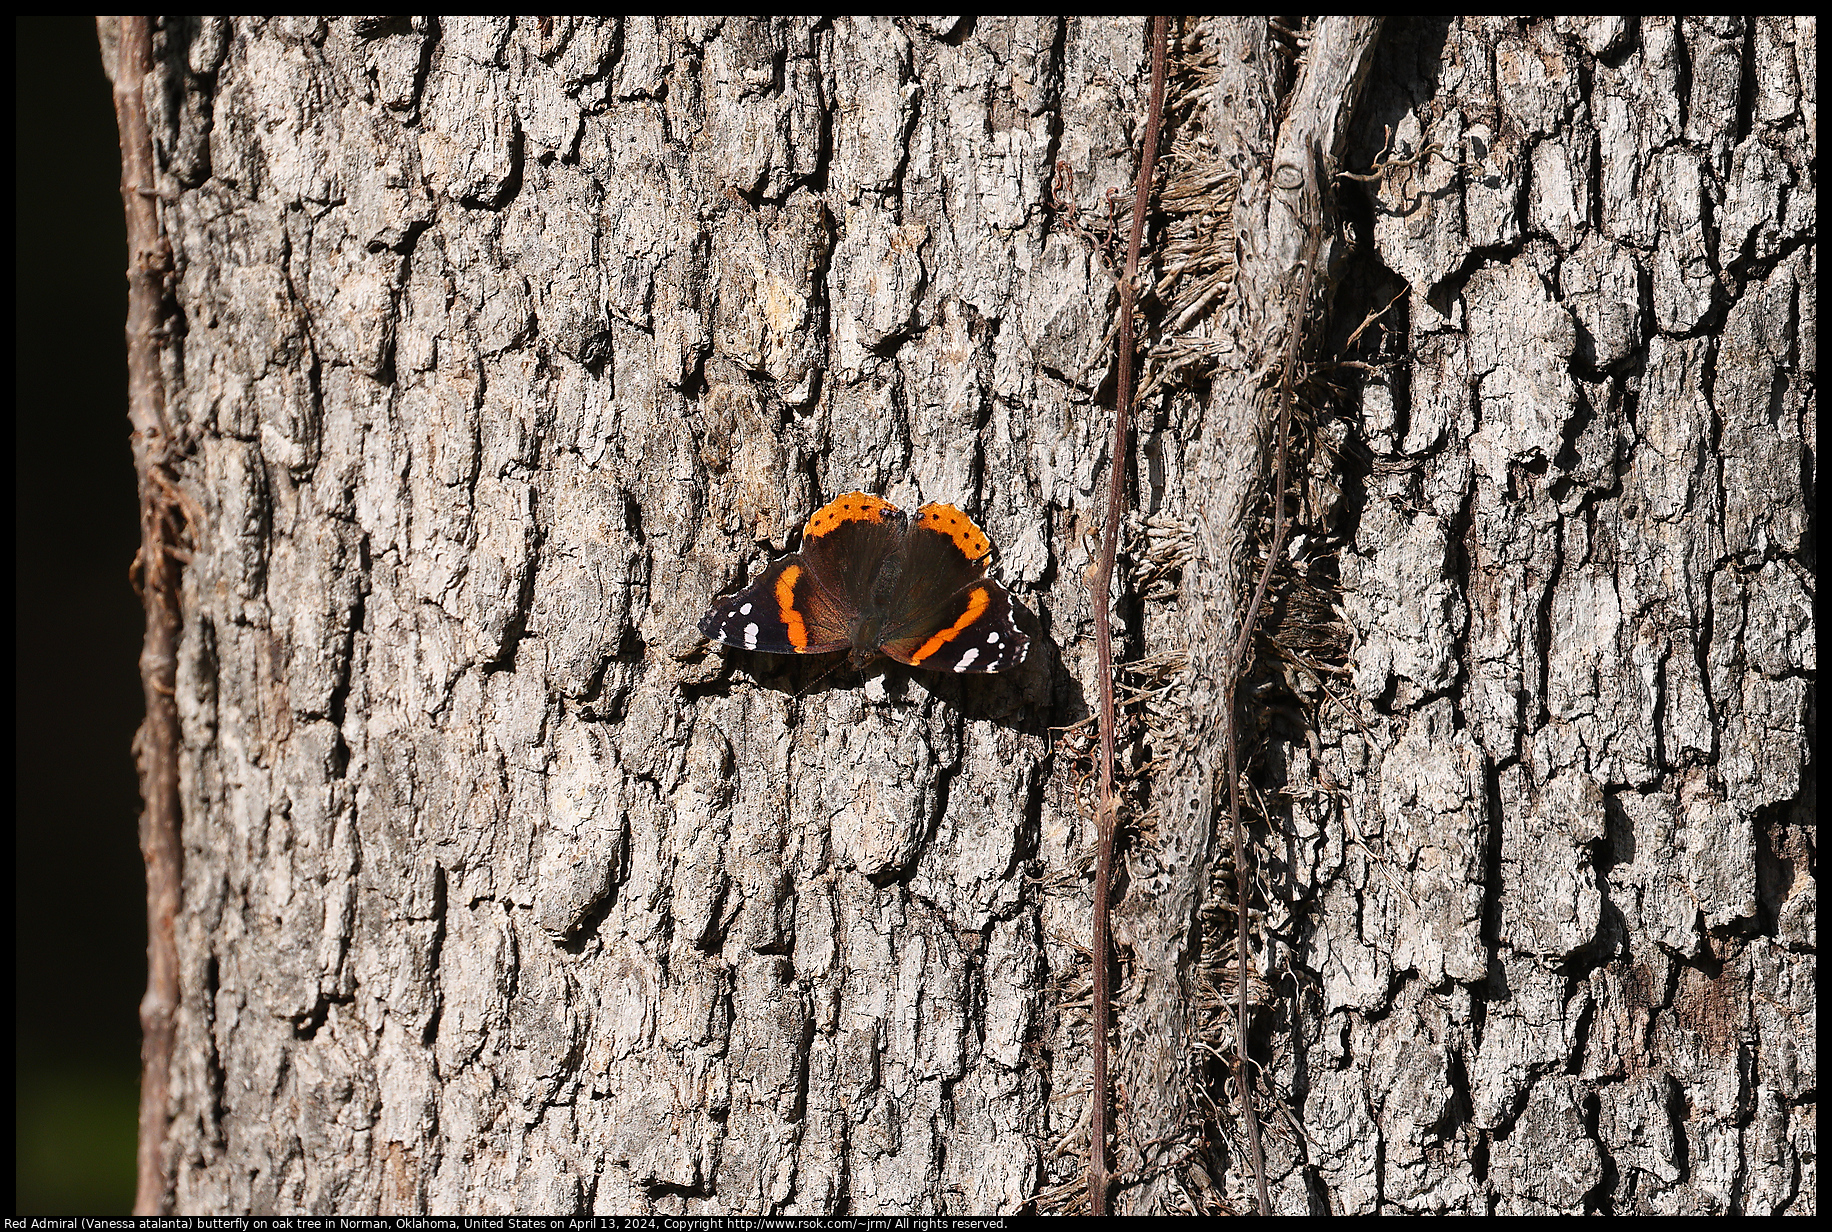 Red Admiral (Vanessa atalanta) butterfly on oak tree in Norman, Oklahoma, United States on April 13, 2024